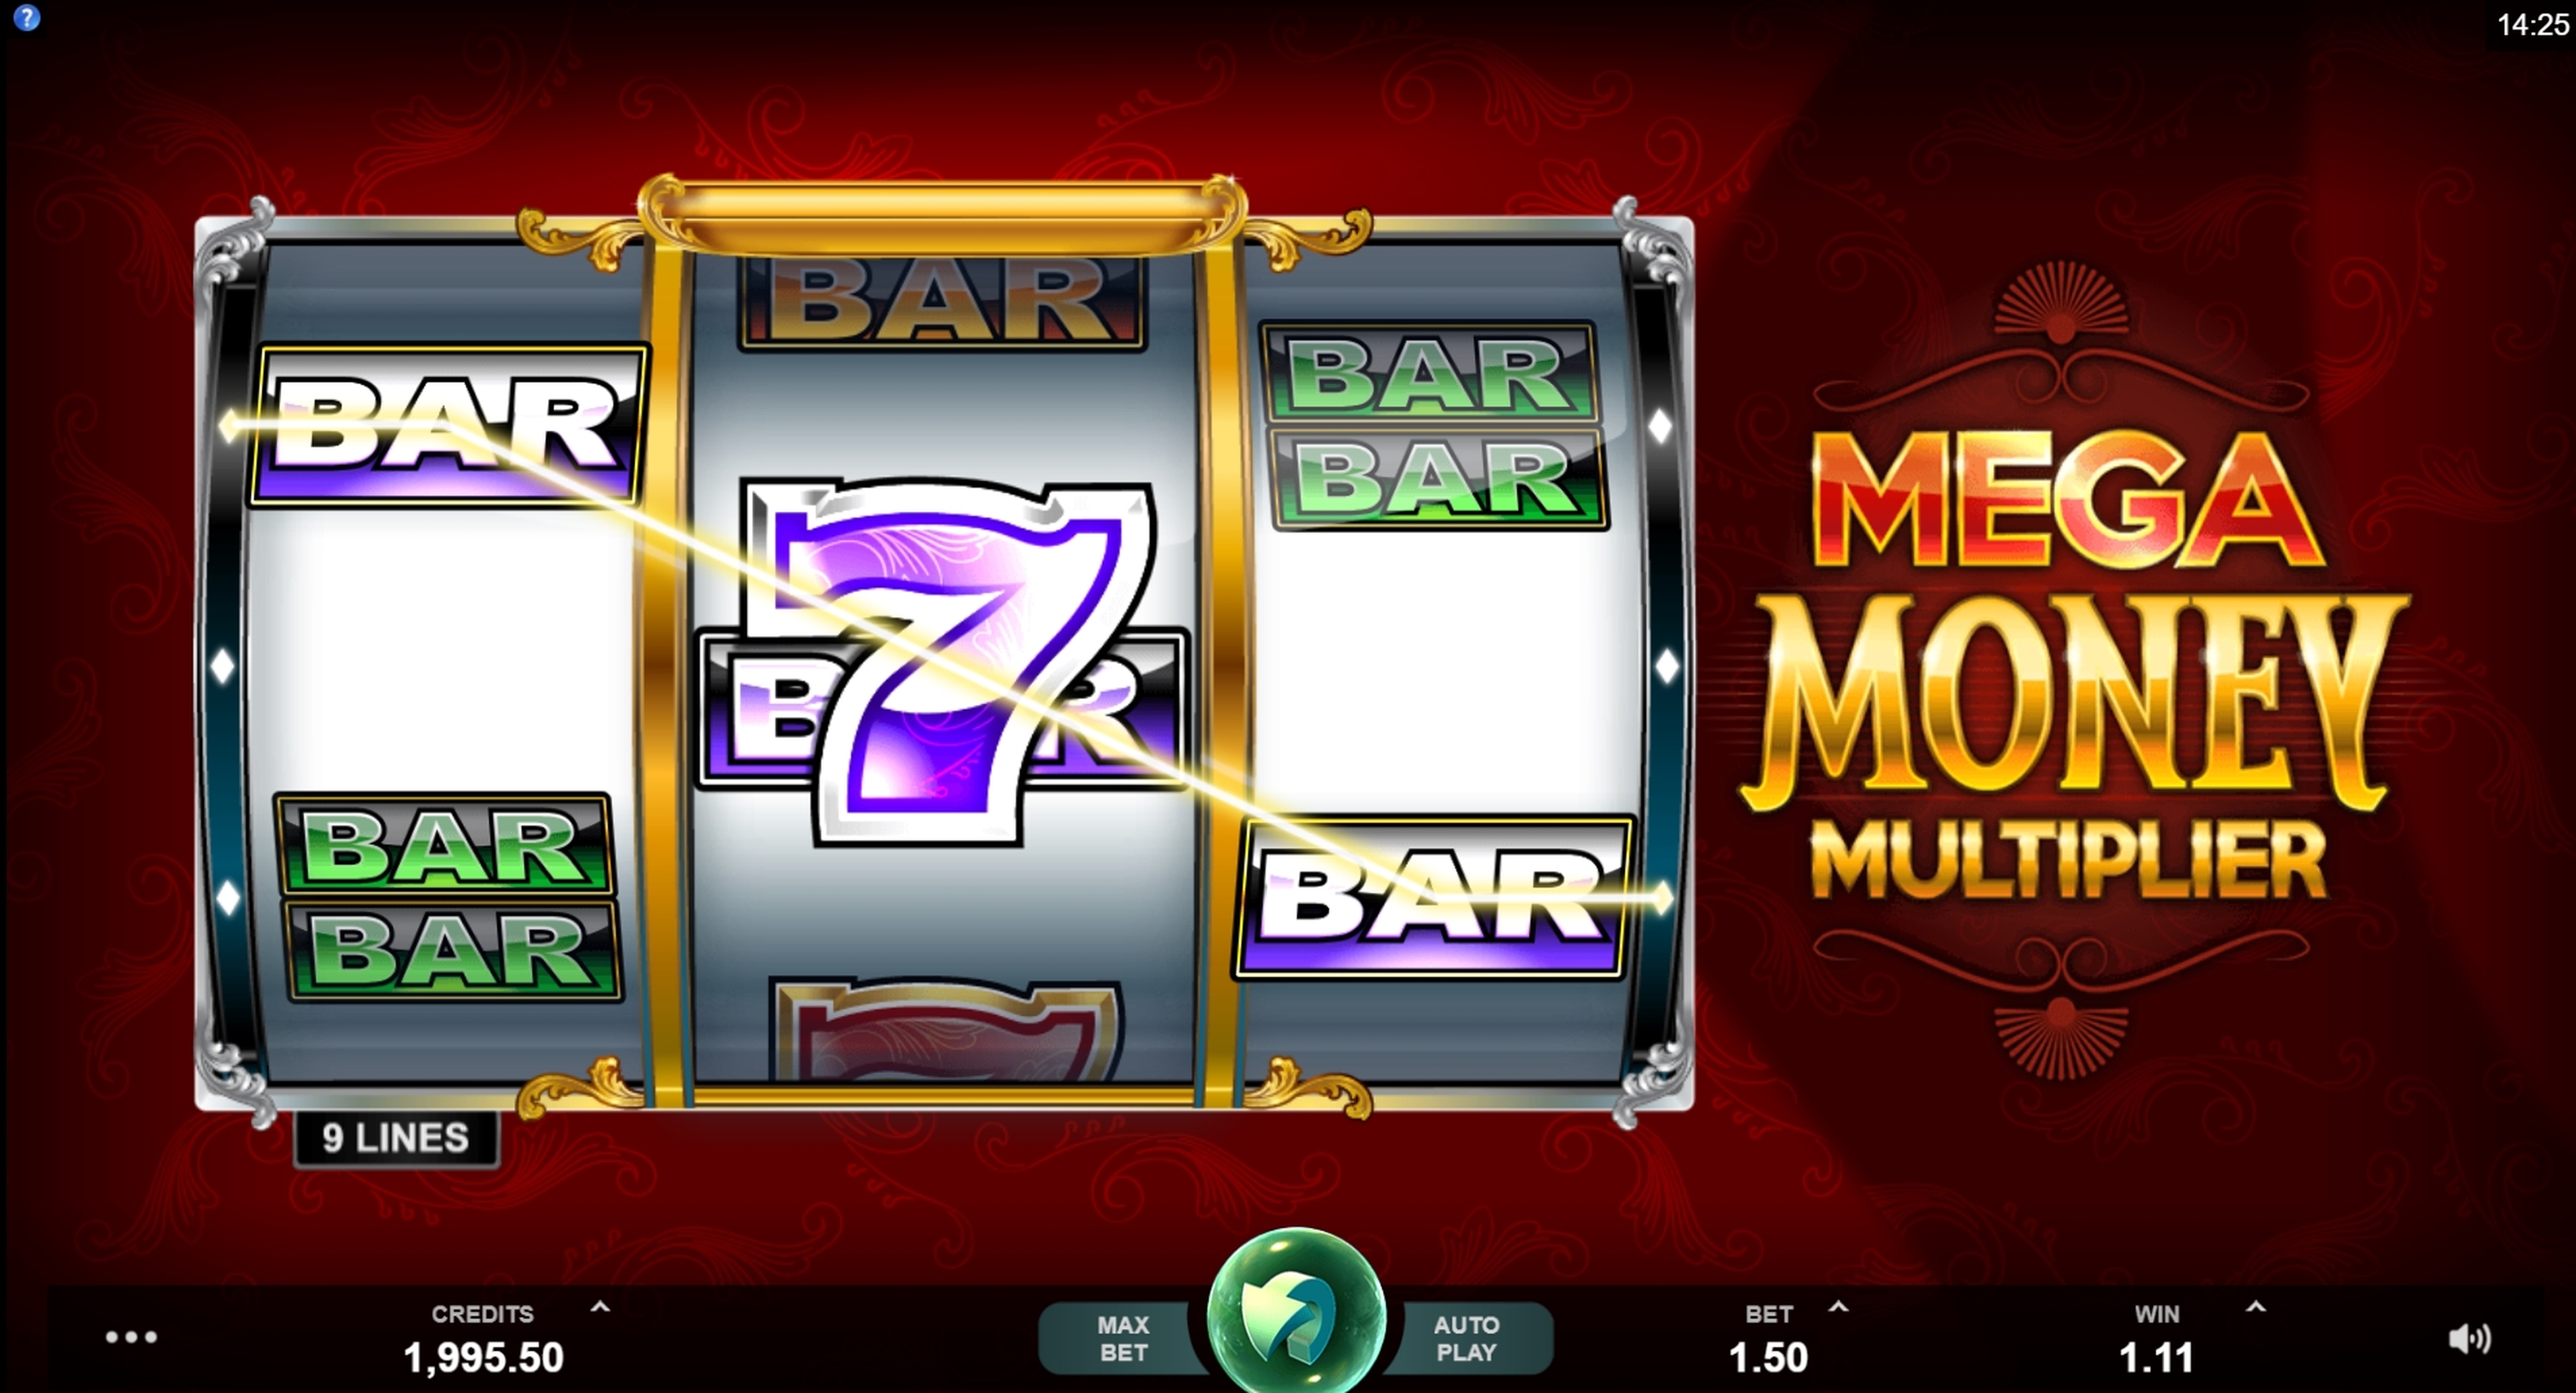 Win Money in Mega Money Multiplier Free Slot Game by MahiGaming